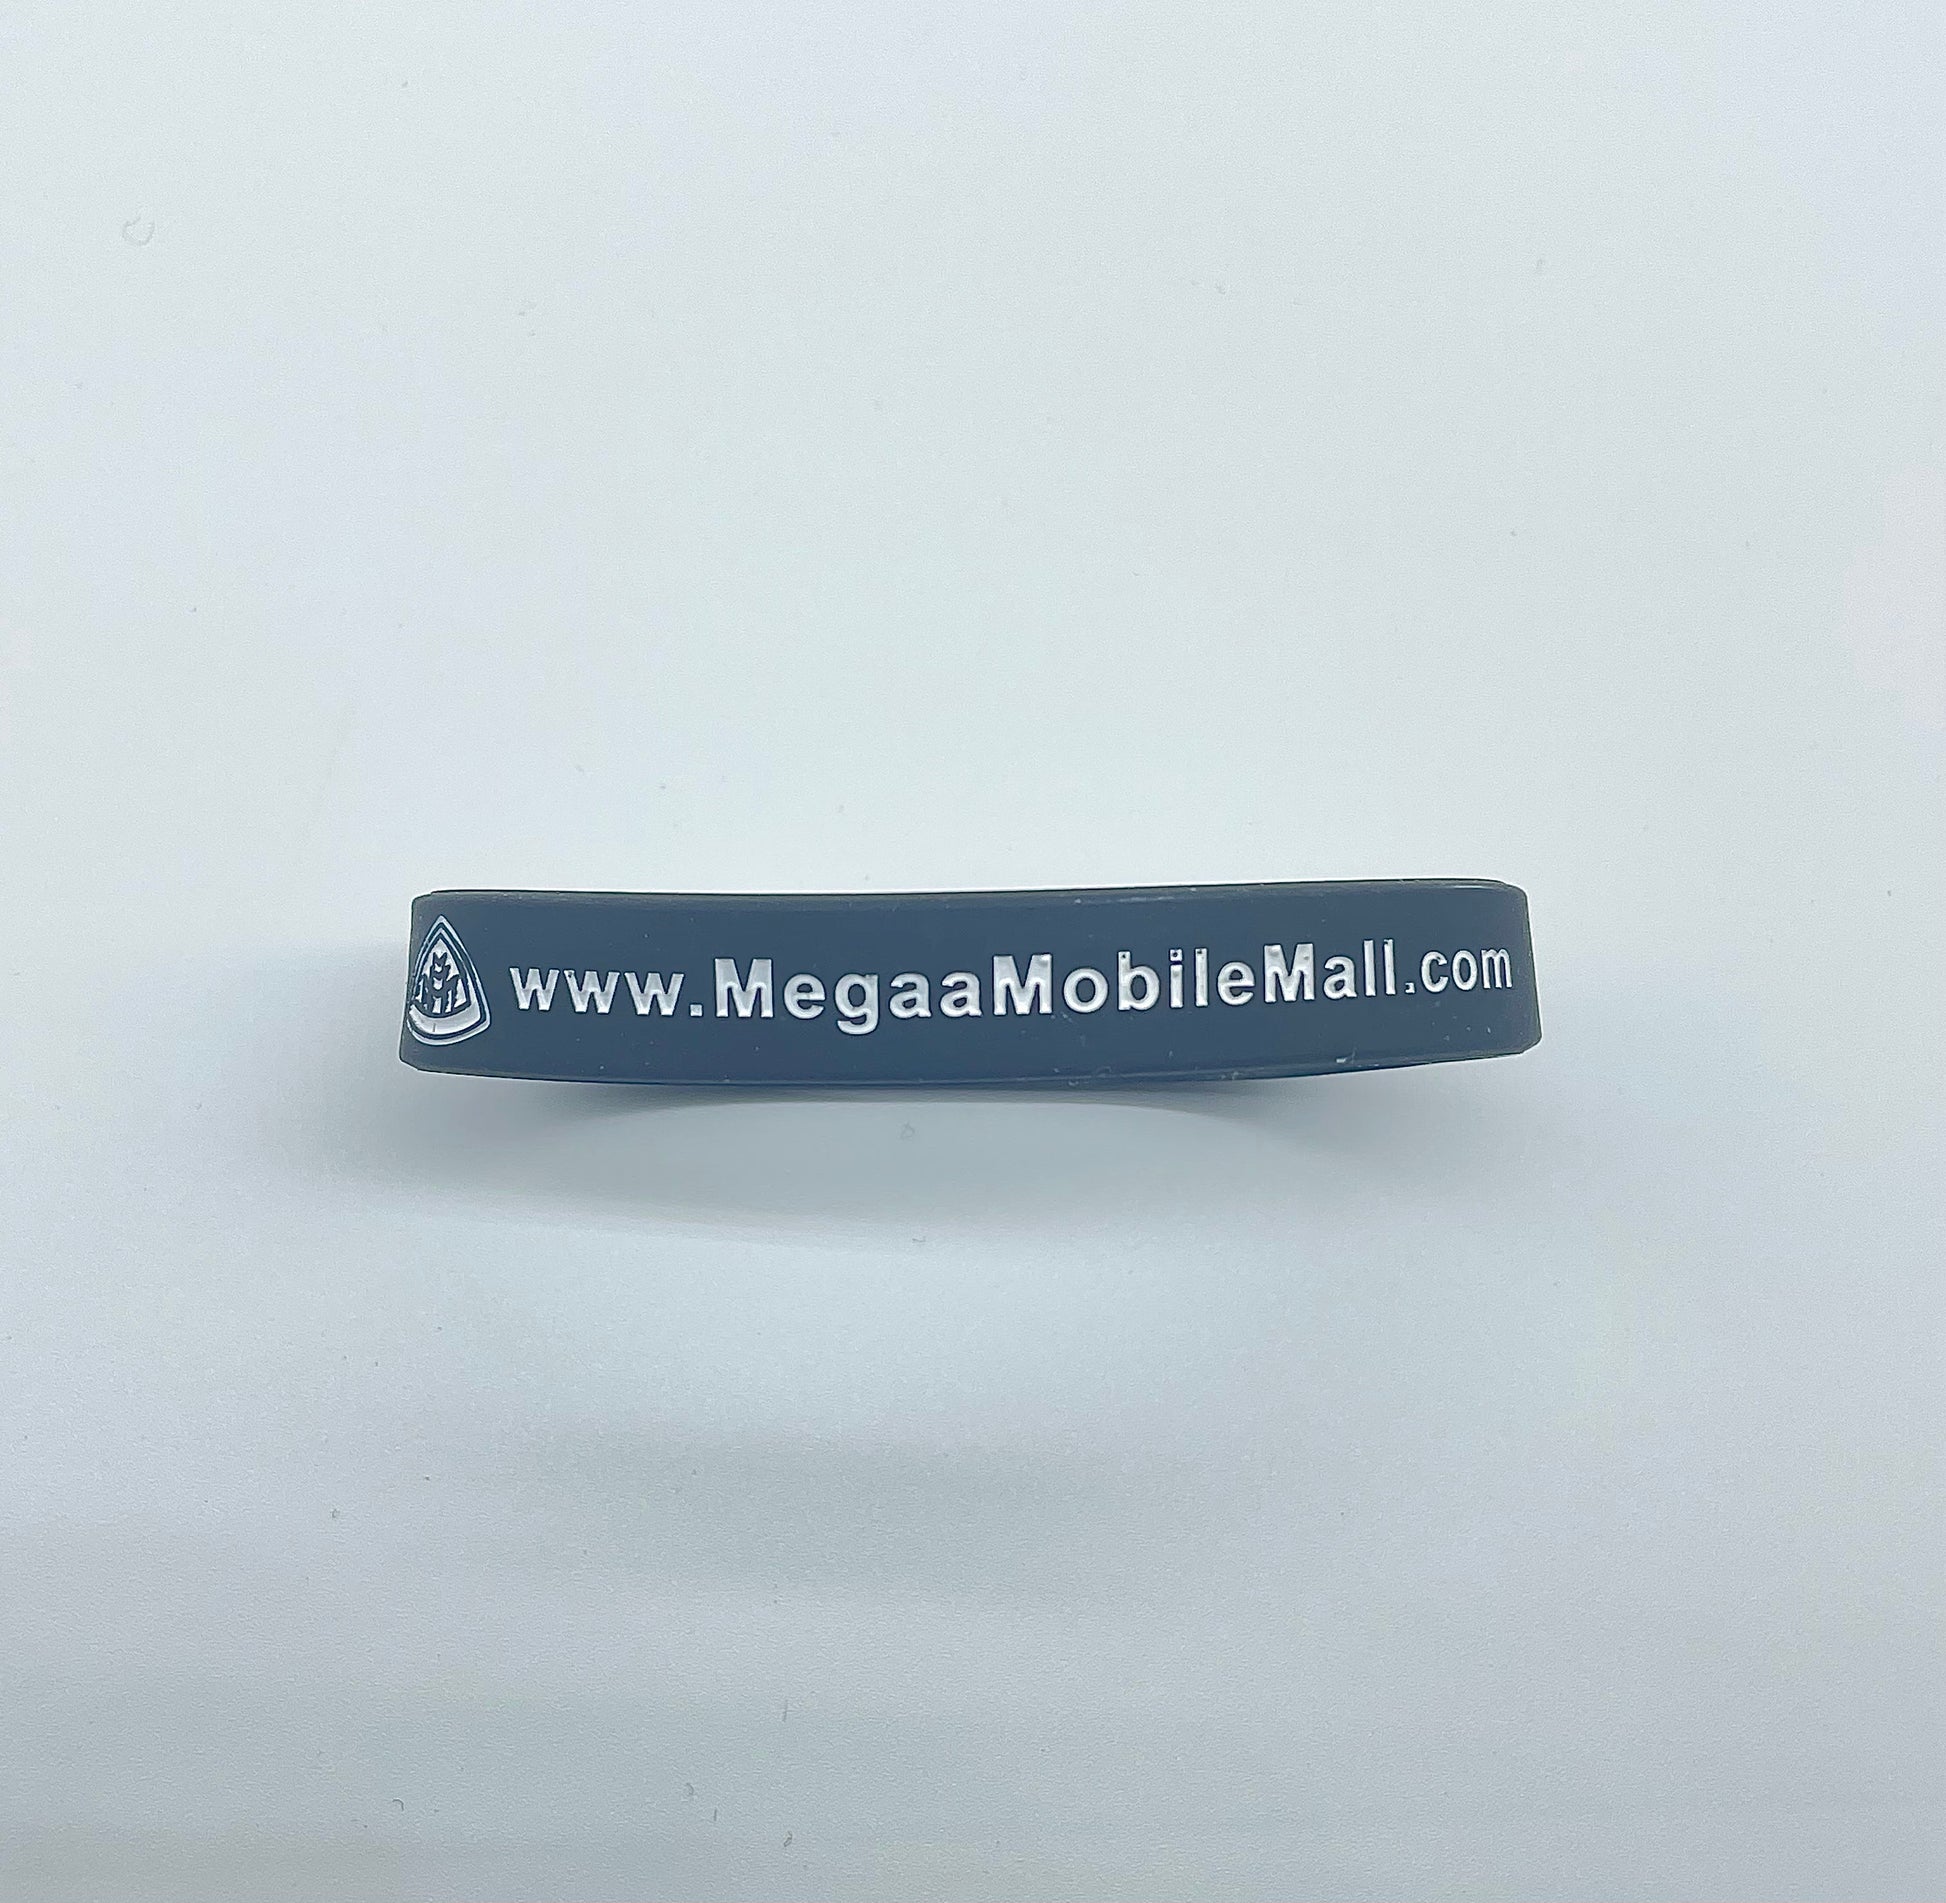 megaamobilemall wrist bands available in black